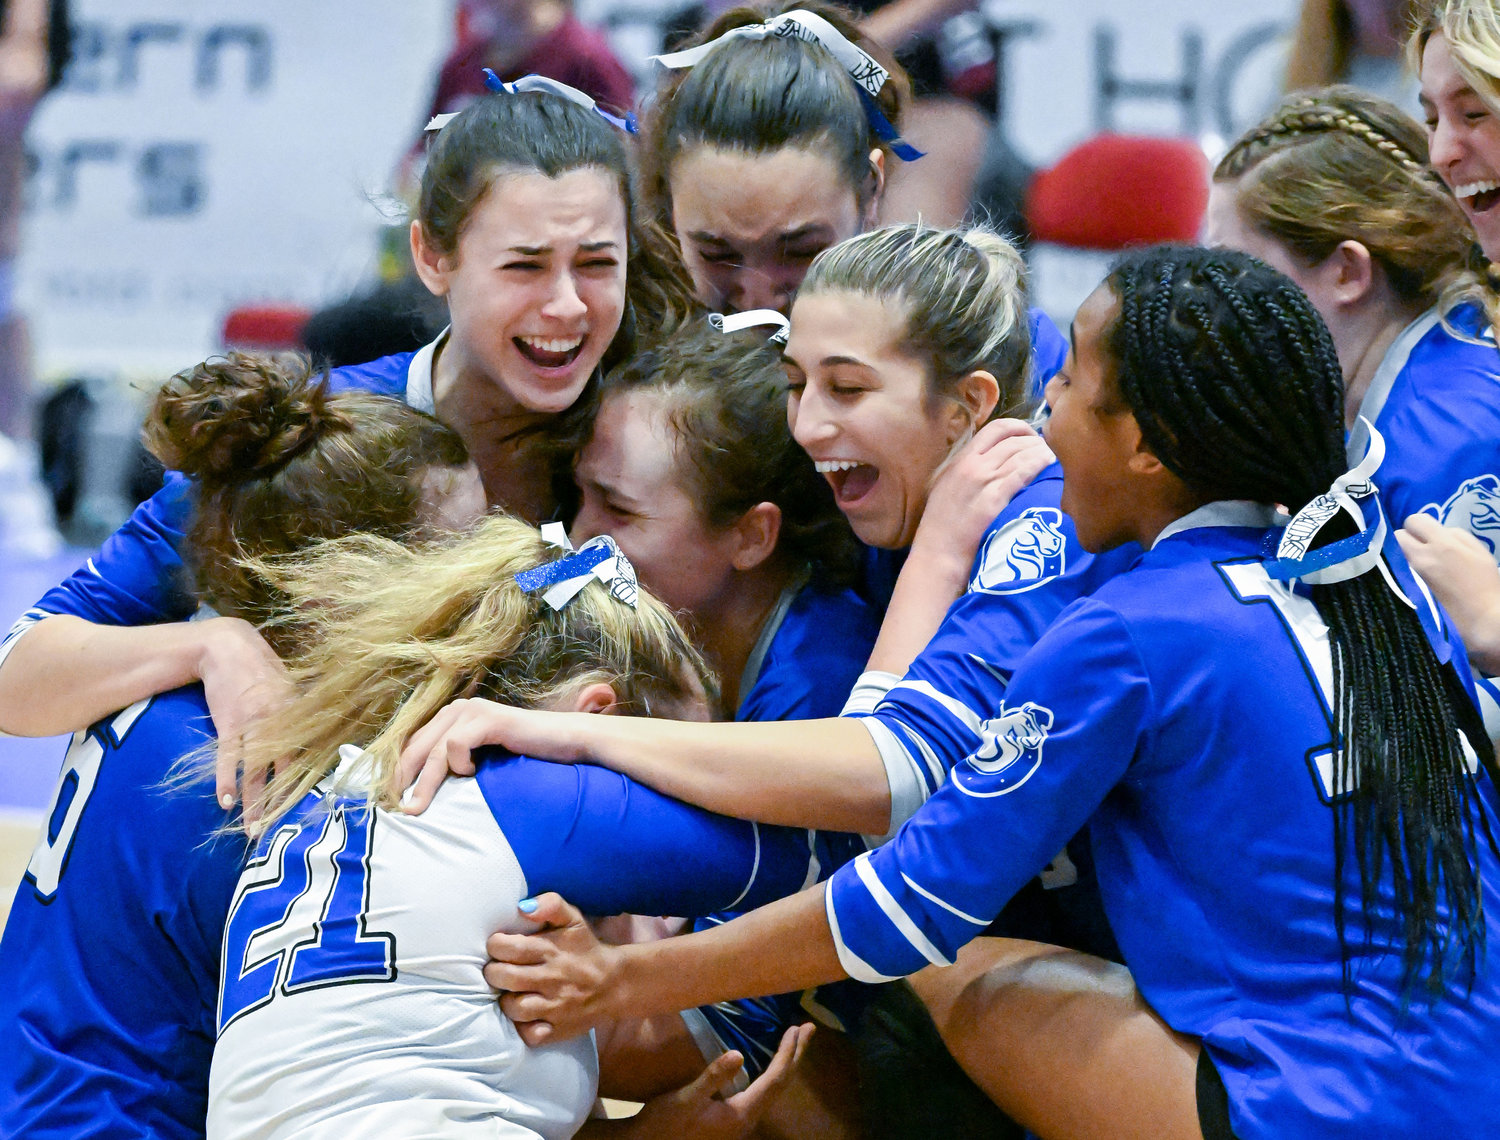 Calhoun swept Burnt Hills-Ballston in the NYS Class A girls' volleyball championship match Sunday afternoon.